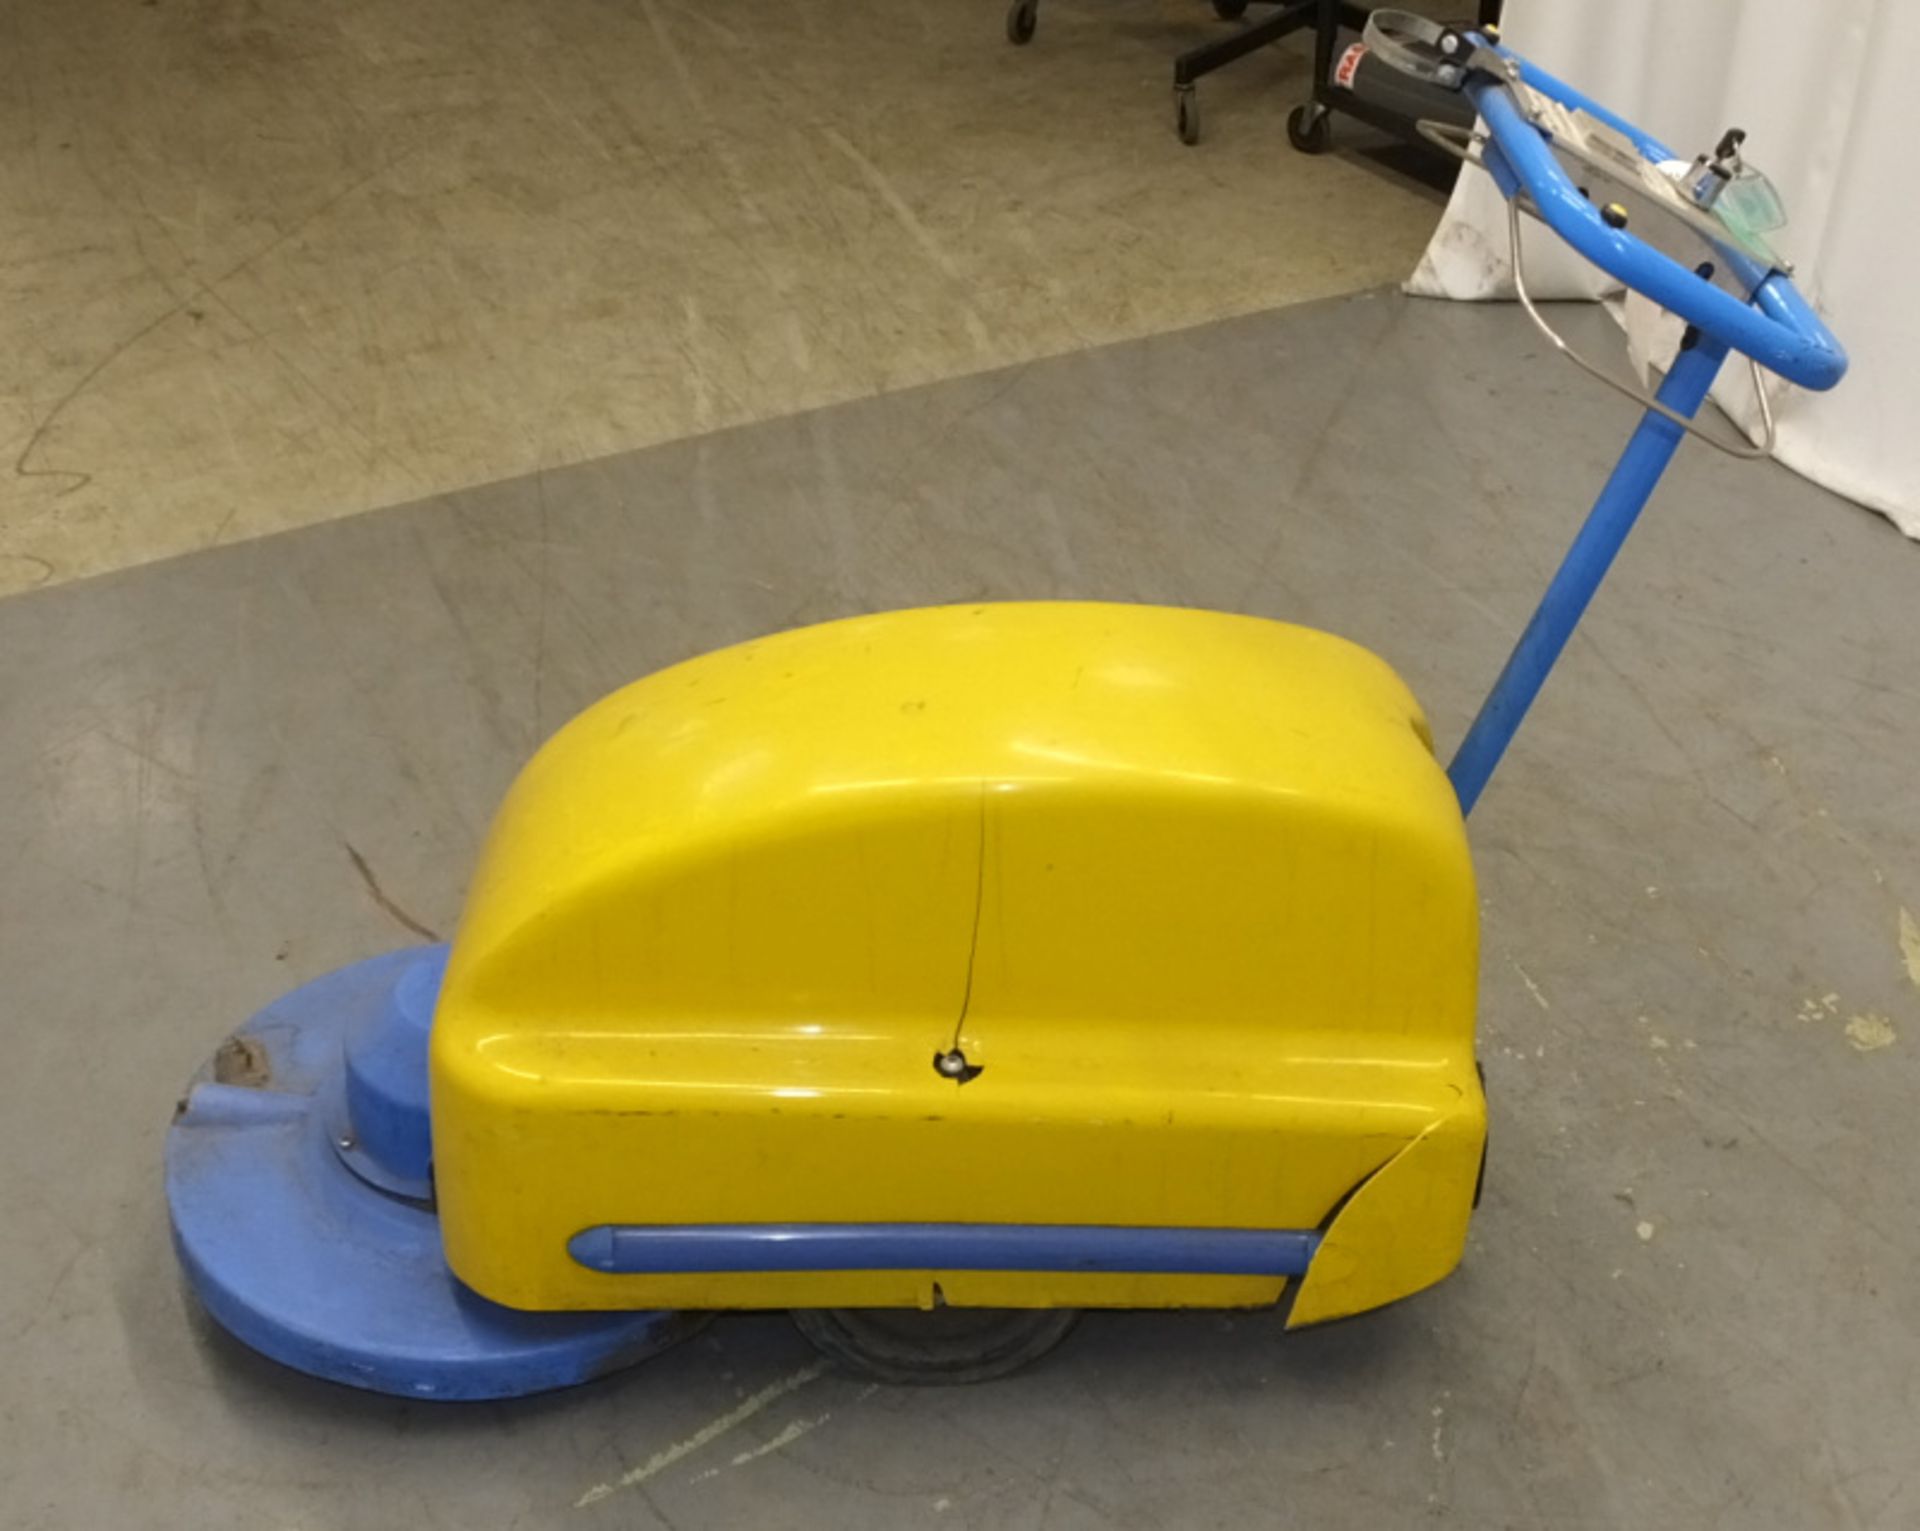 Tennant Challenger Nippy 500 Walk-Behind Floor Cleaner - has key but doesn't power up - cracked case - Image 4 of 7